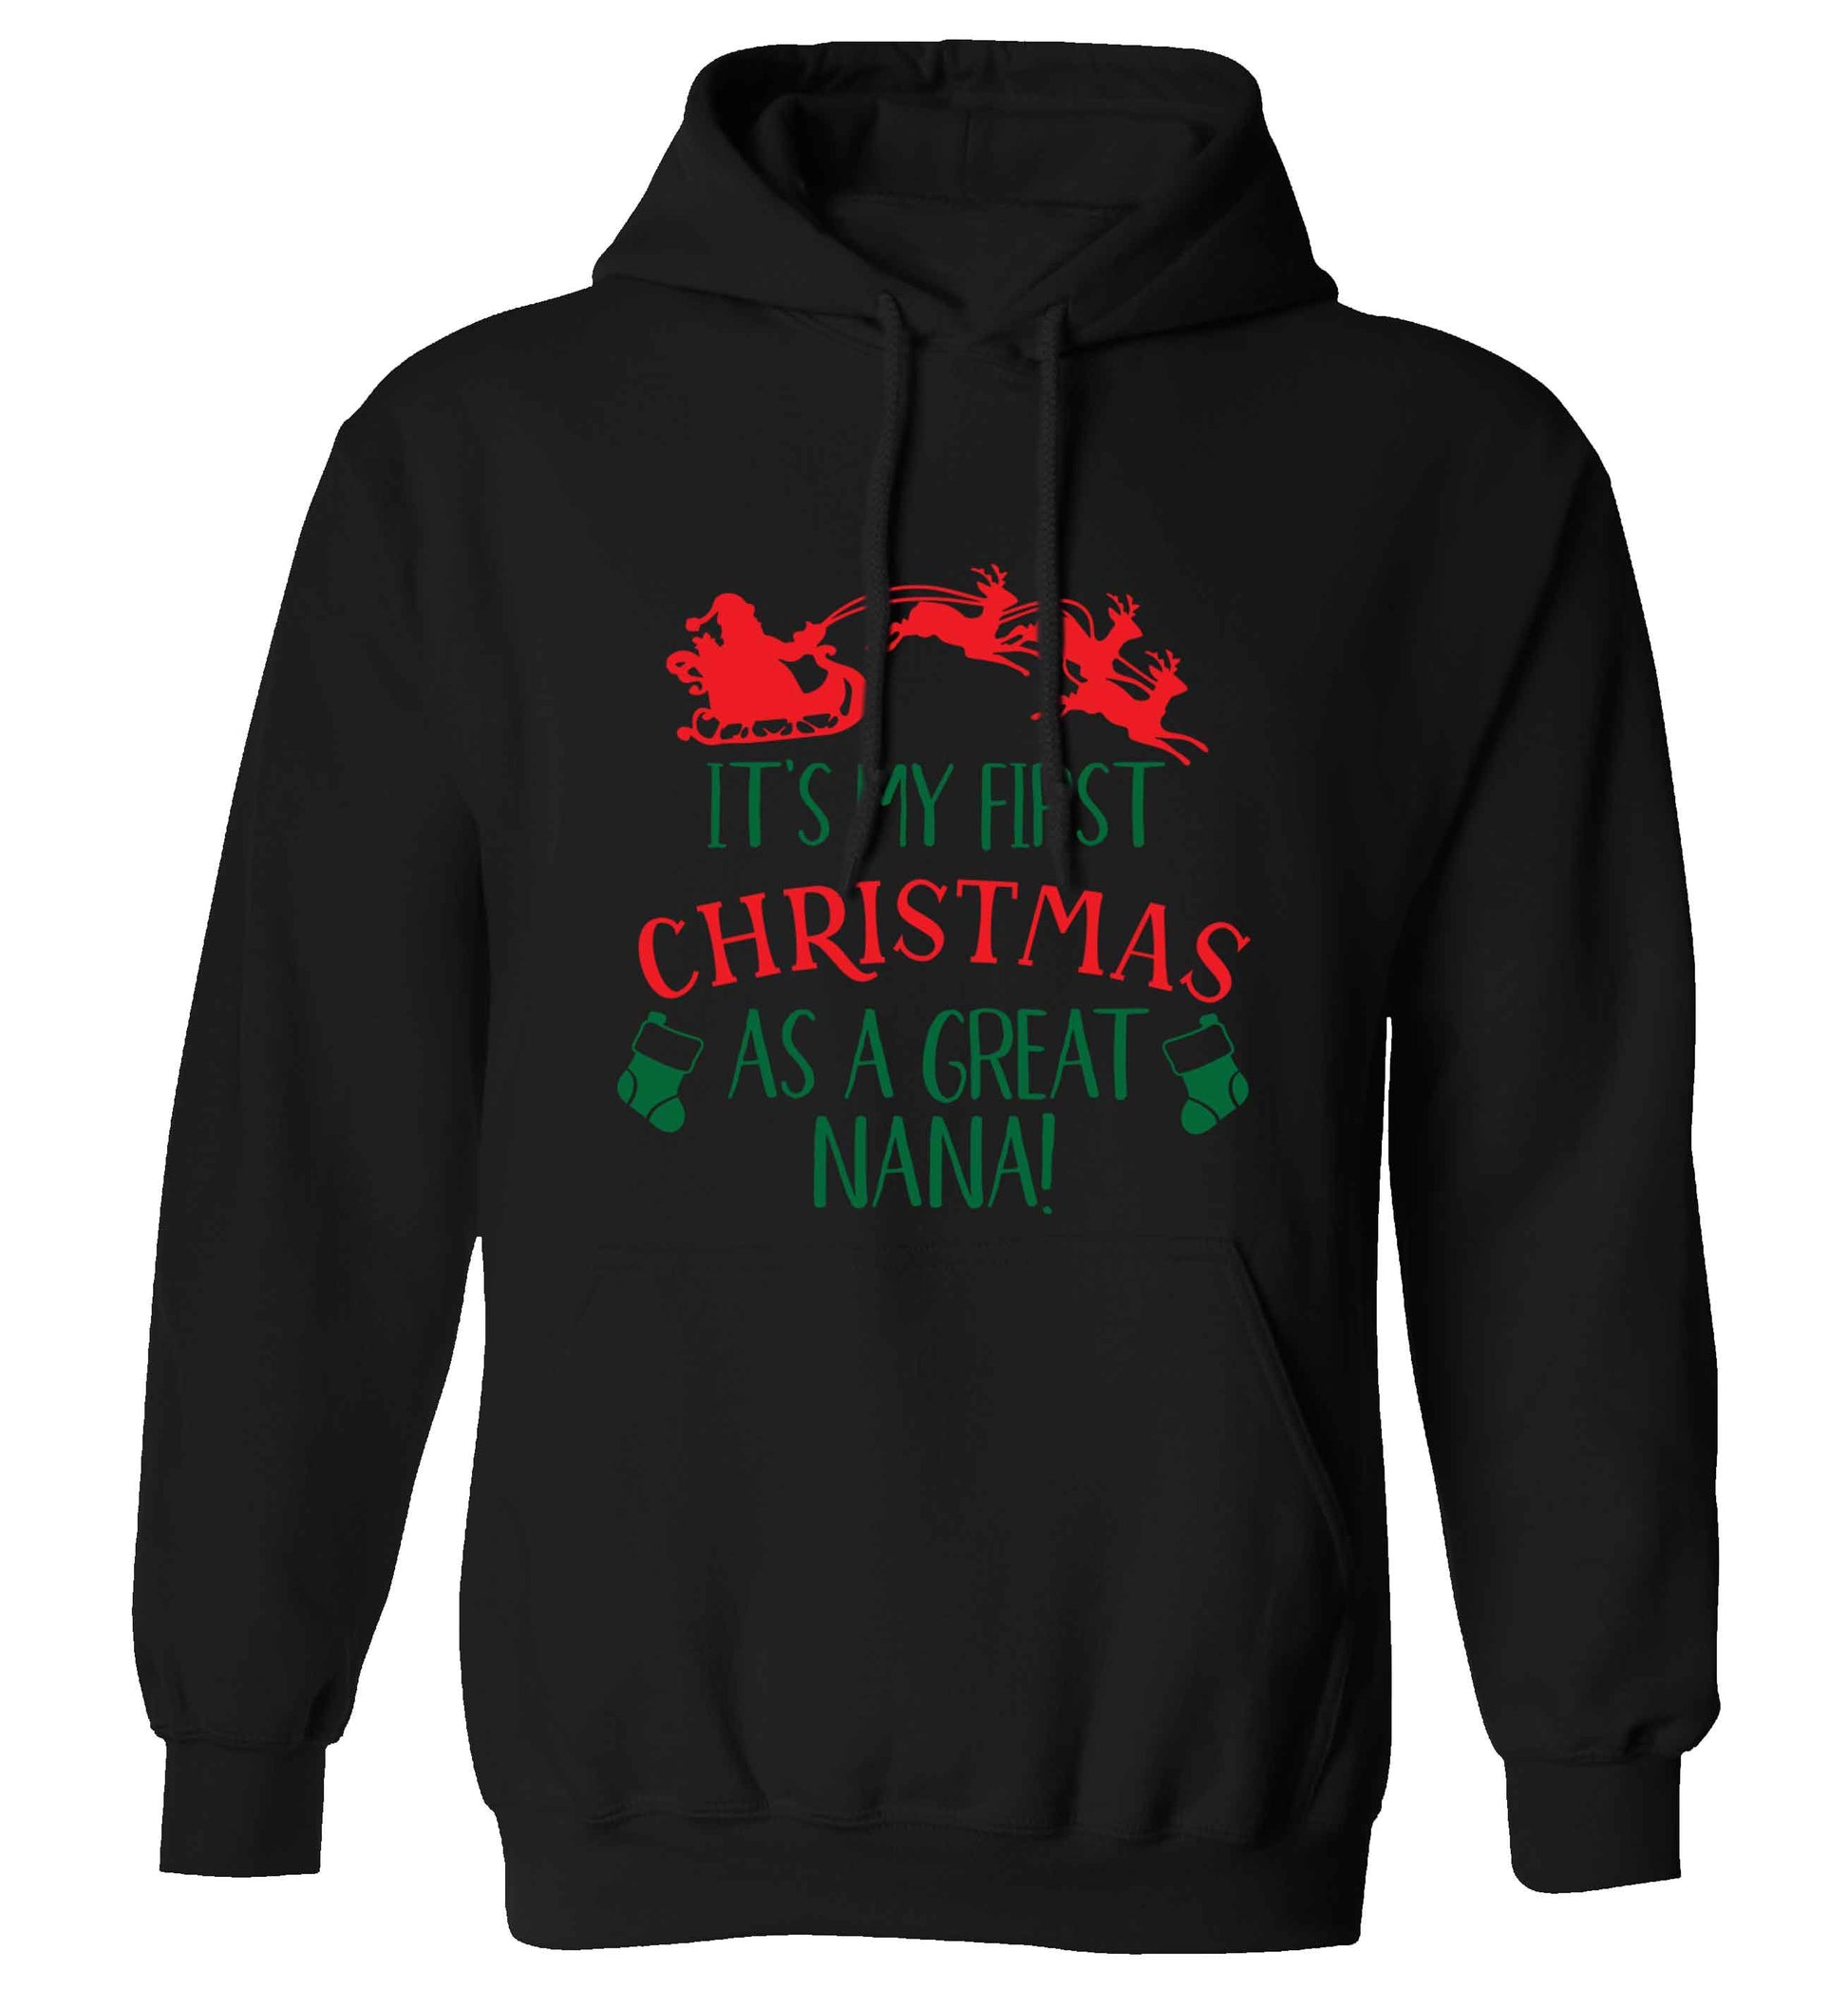 It's my first Christmas as a great nana! adults unisex black hoodie 2XL